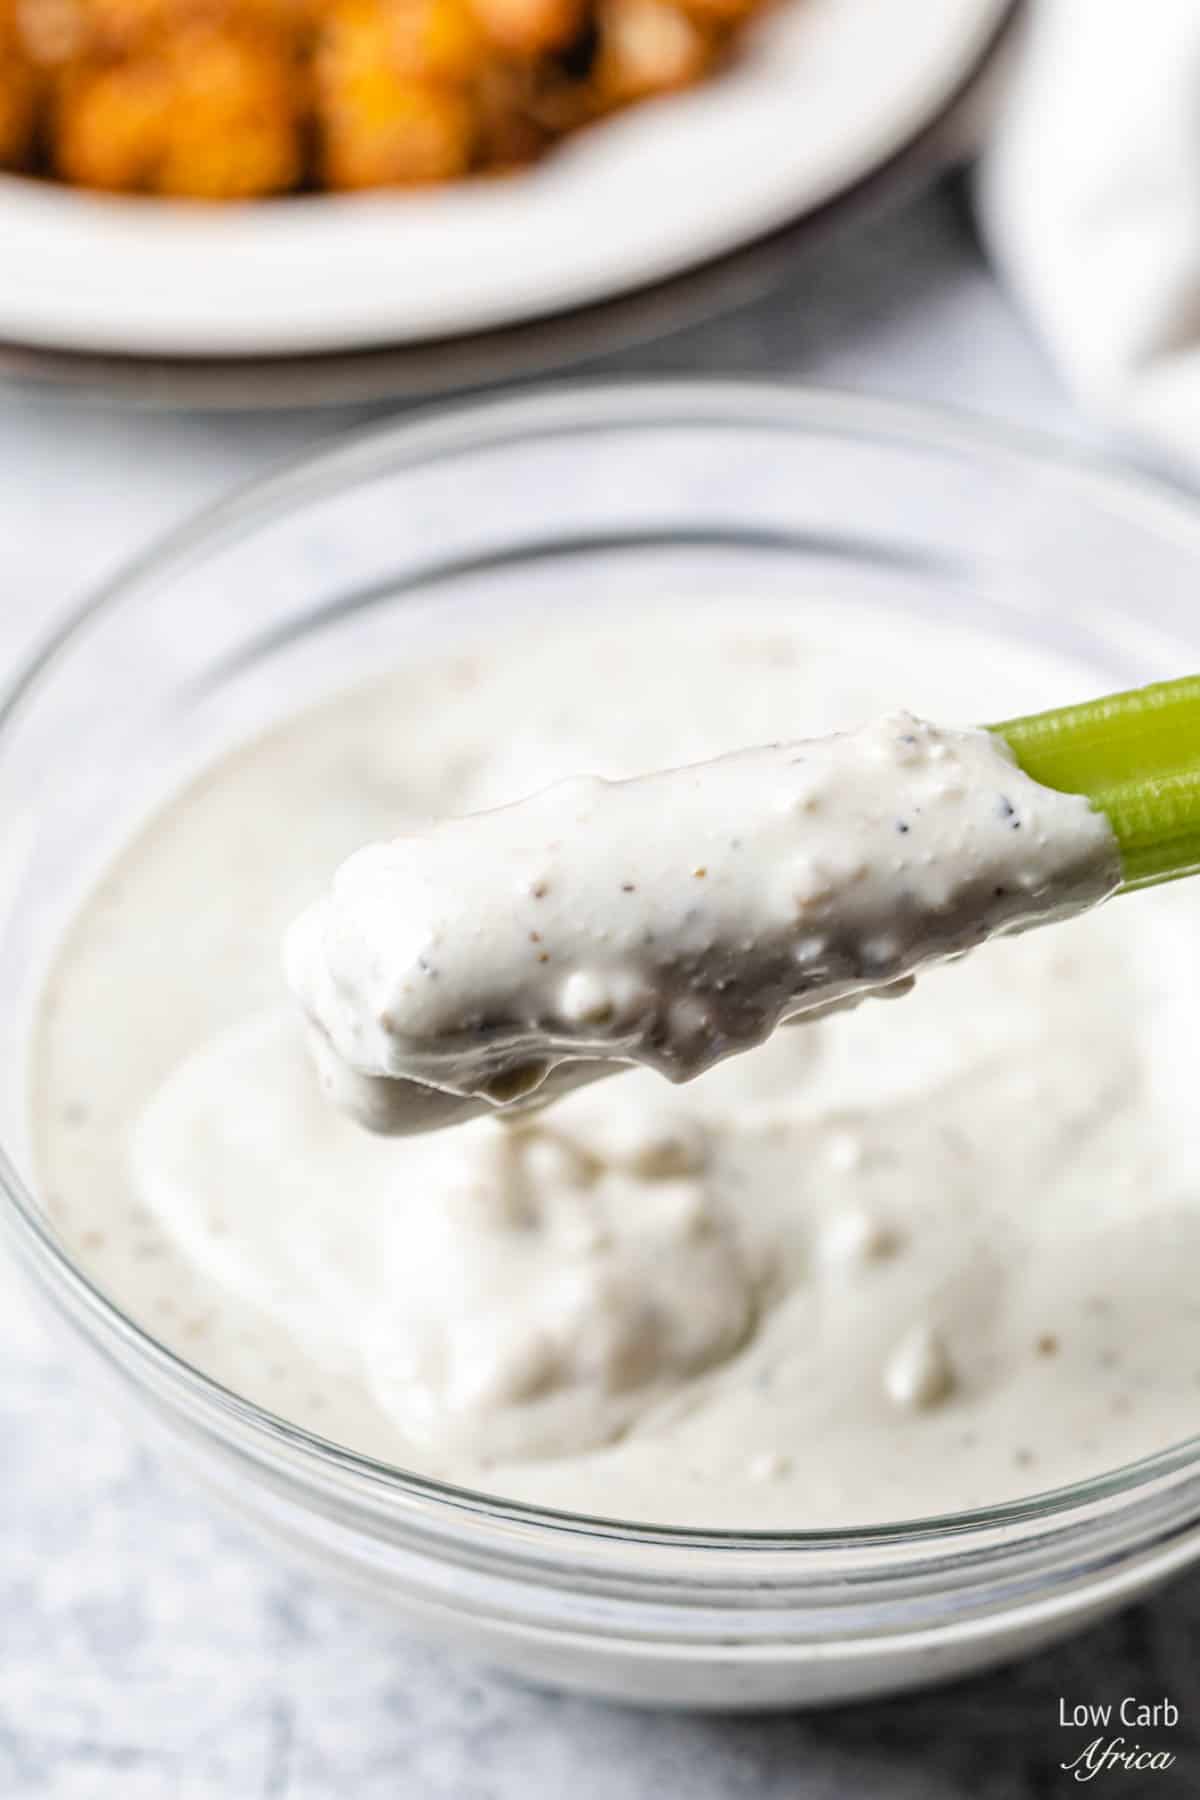 scooping out cheese dressing with celery